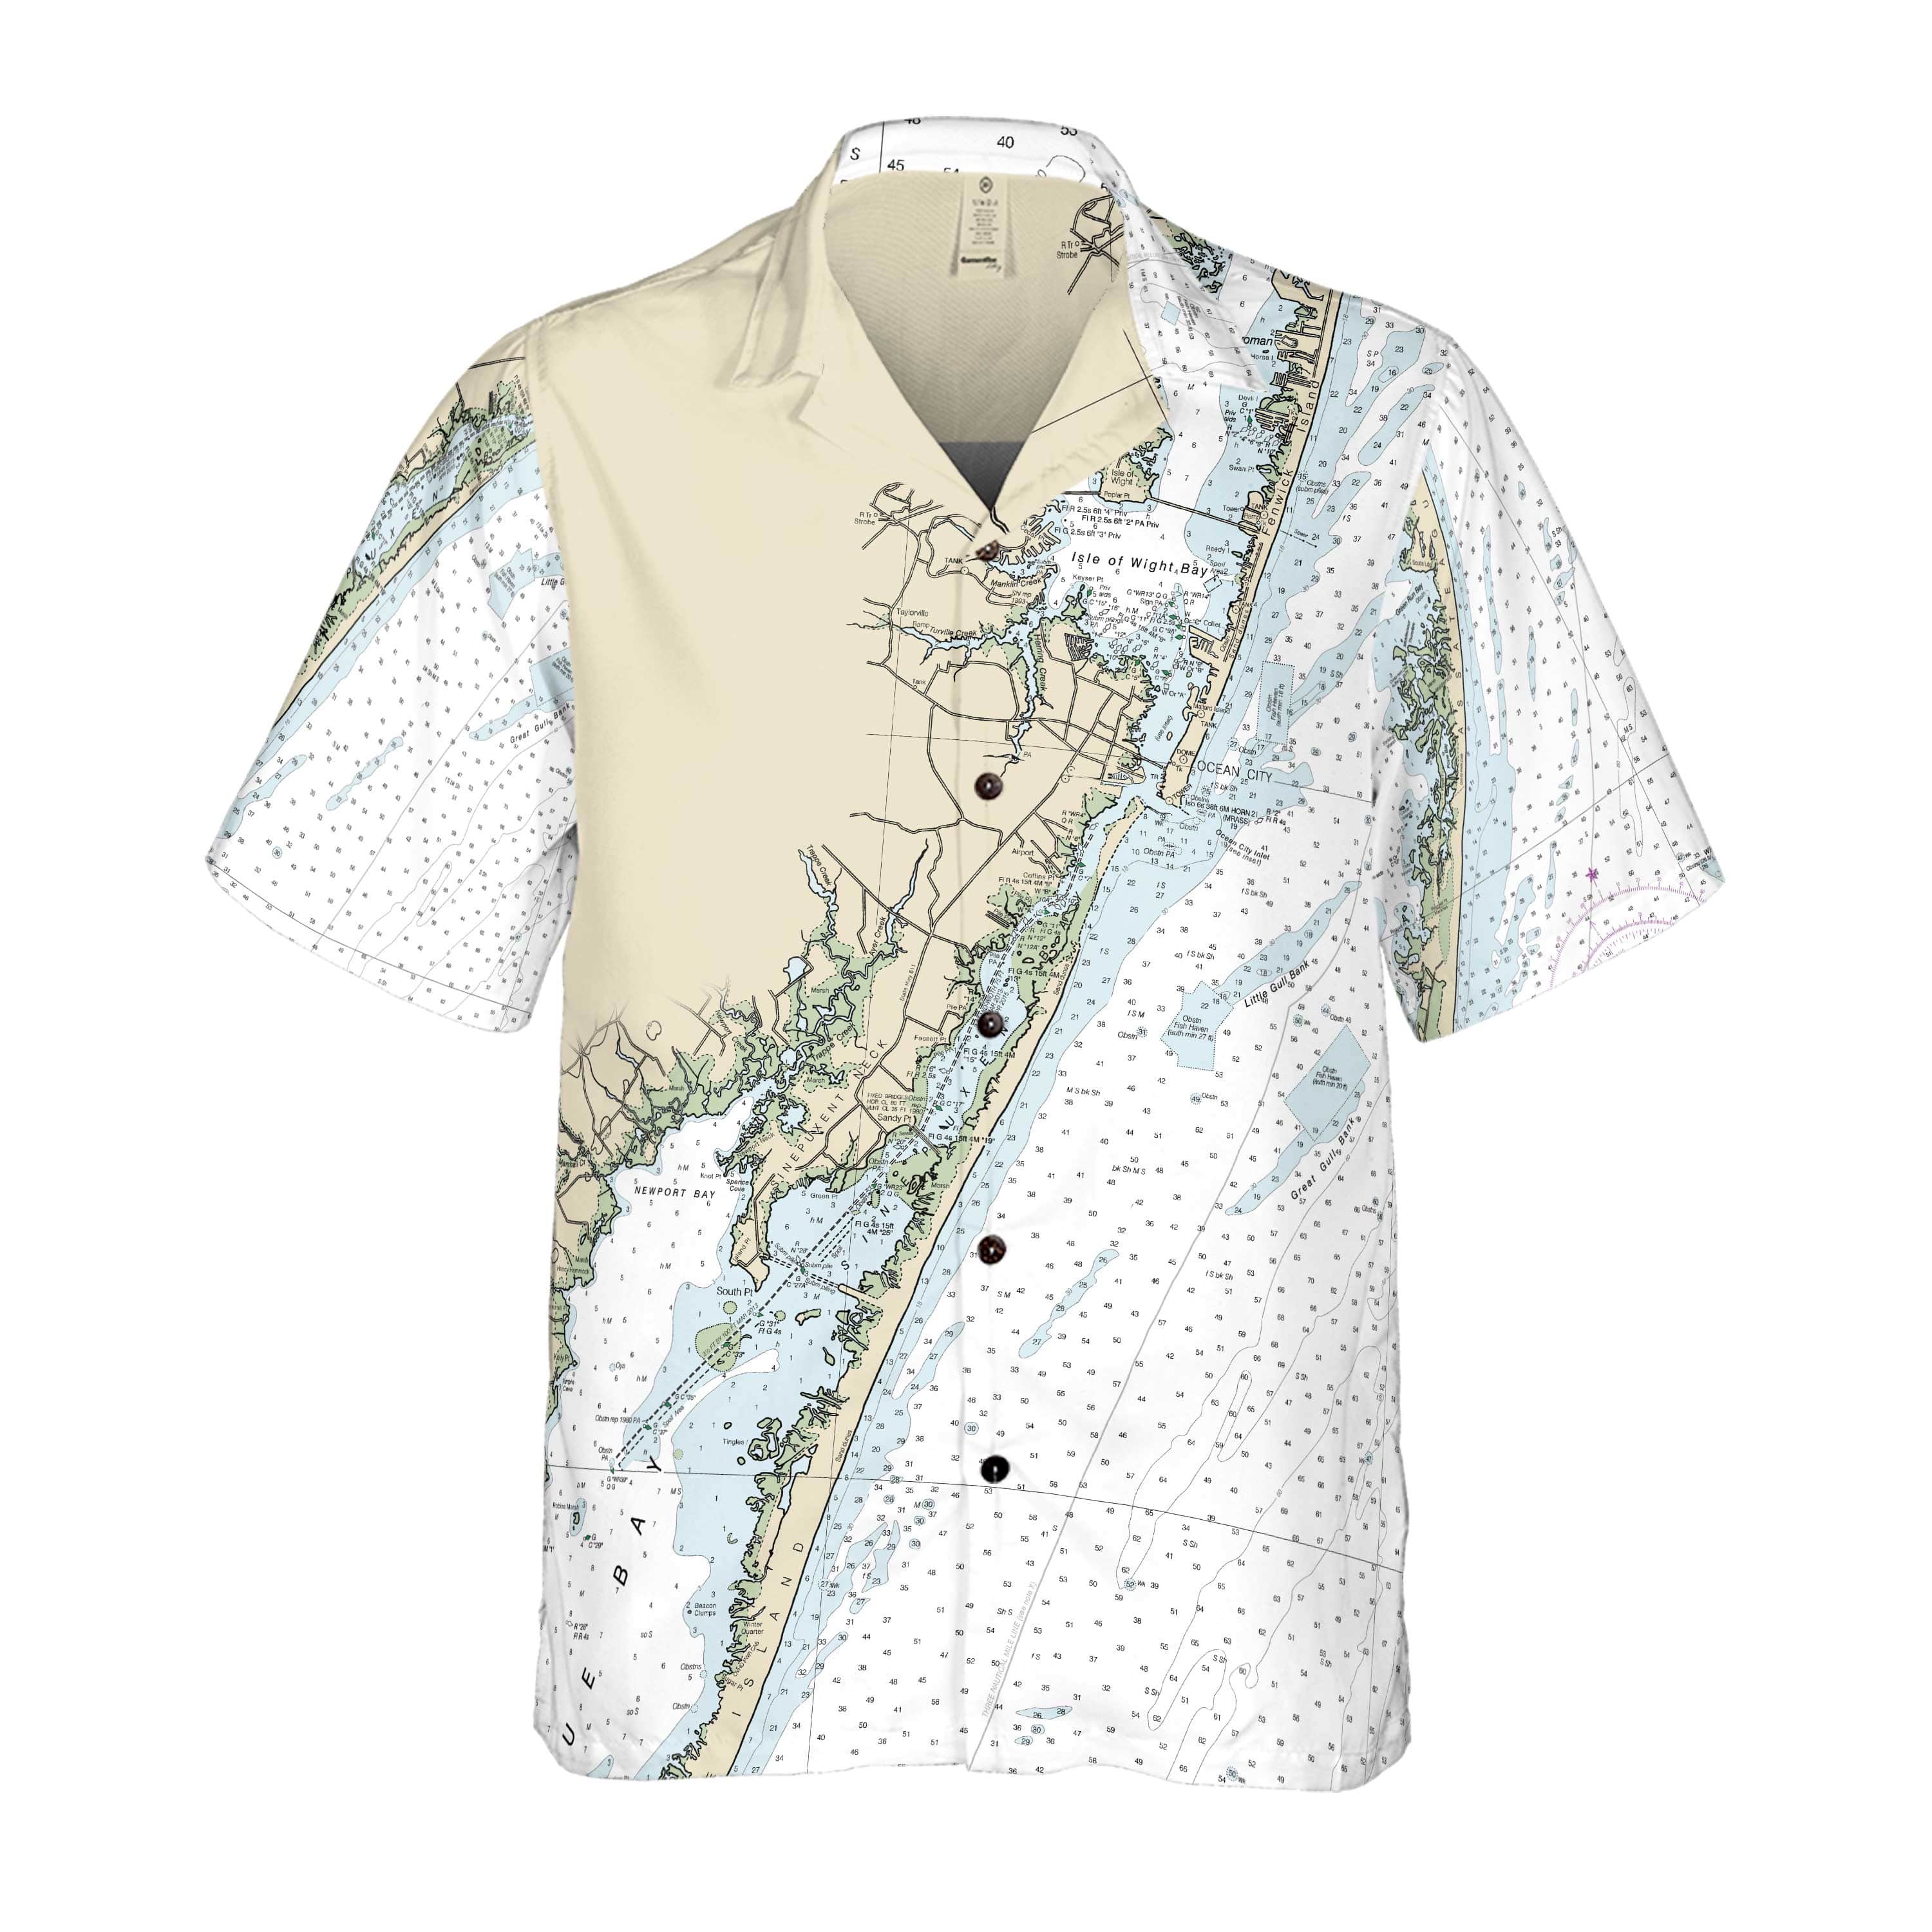 The Ocean City and Chincoteague Bay Coconut Button Camp Shirt